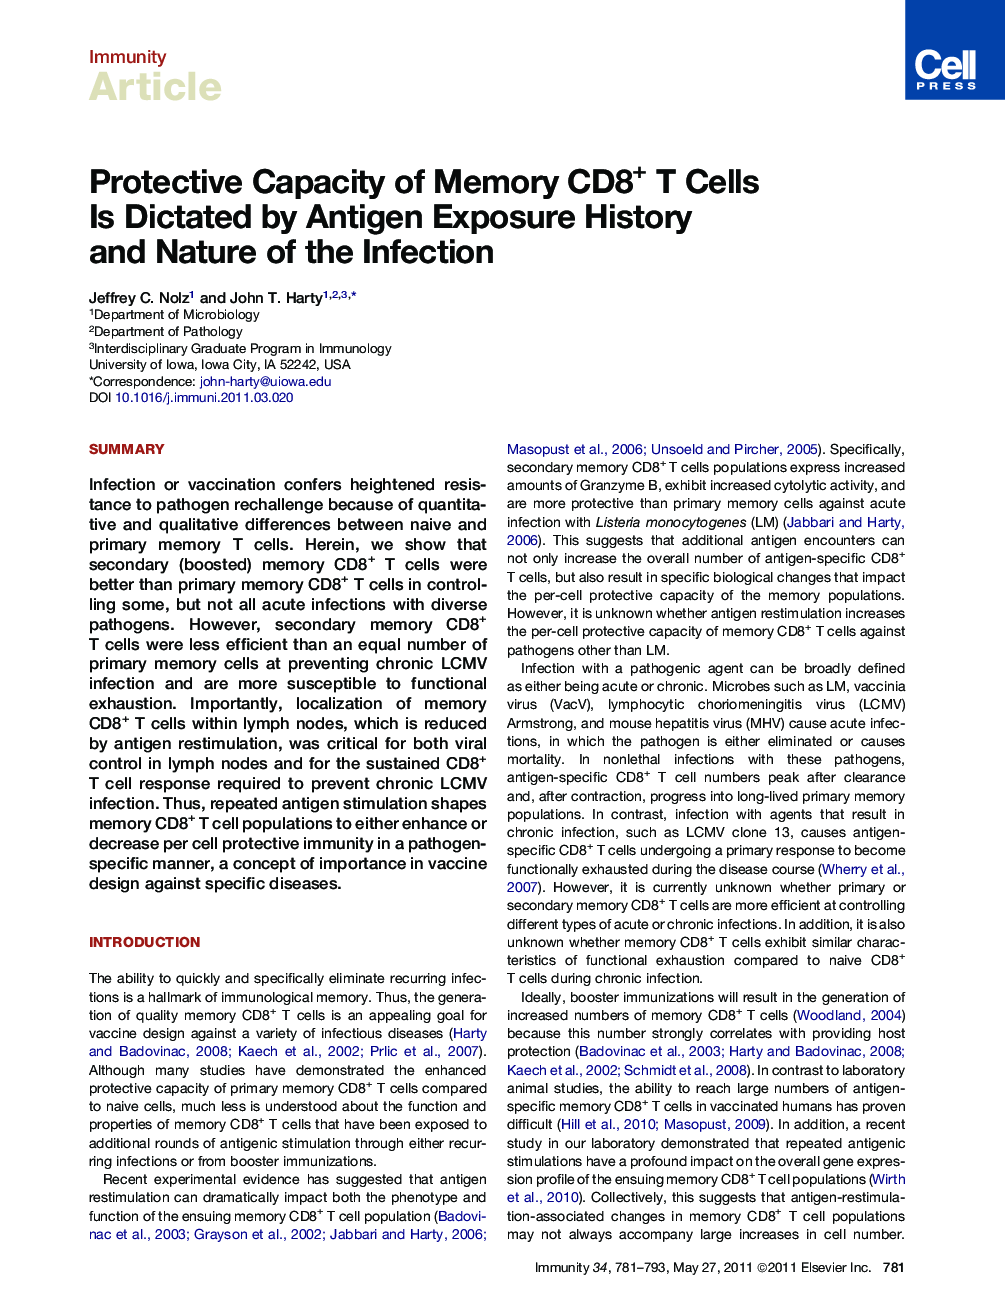 Protective Capacity of Memory CD8+ T Cells Is Dictated by Antigen Exposure History and Nature of the Infection